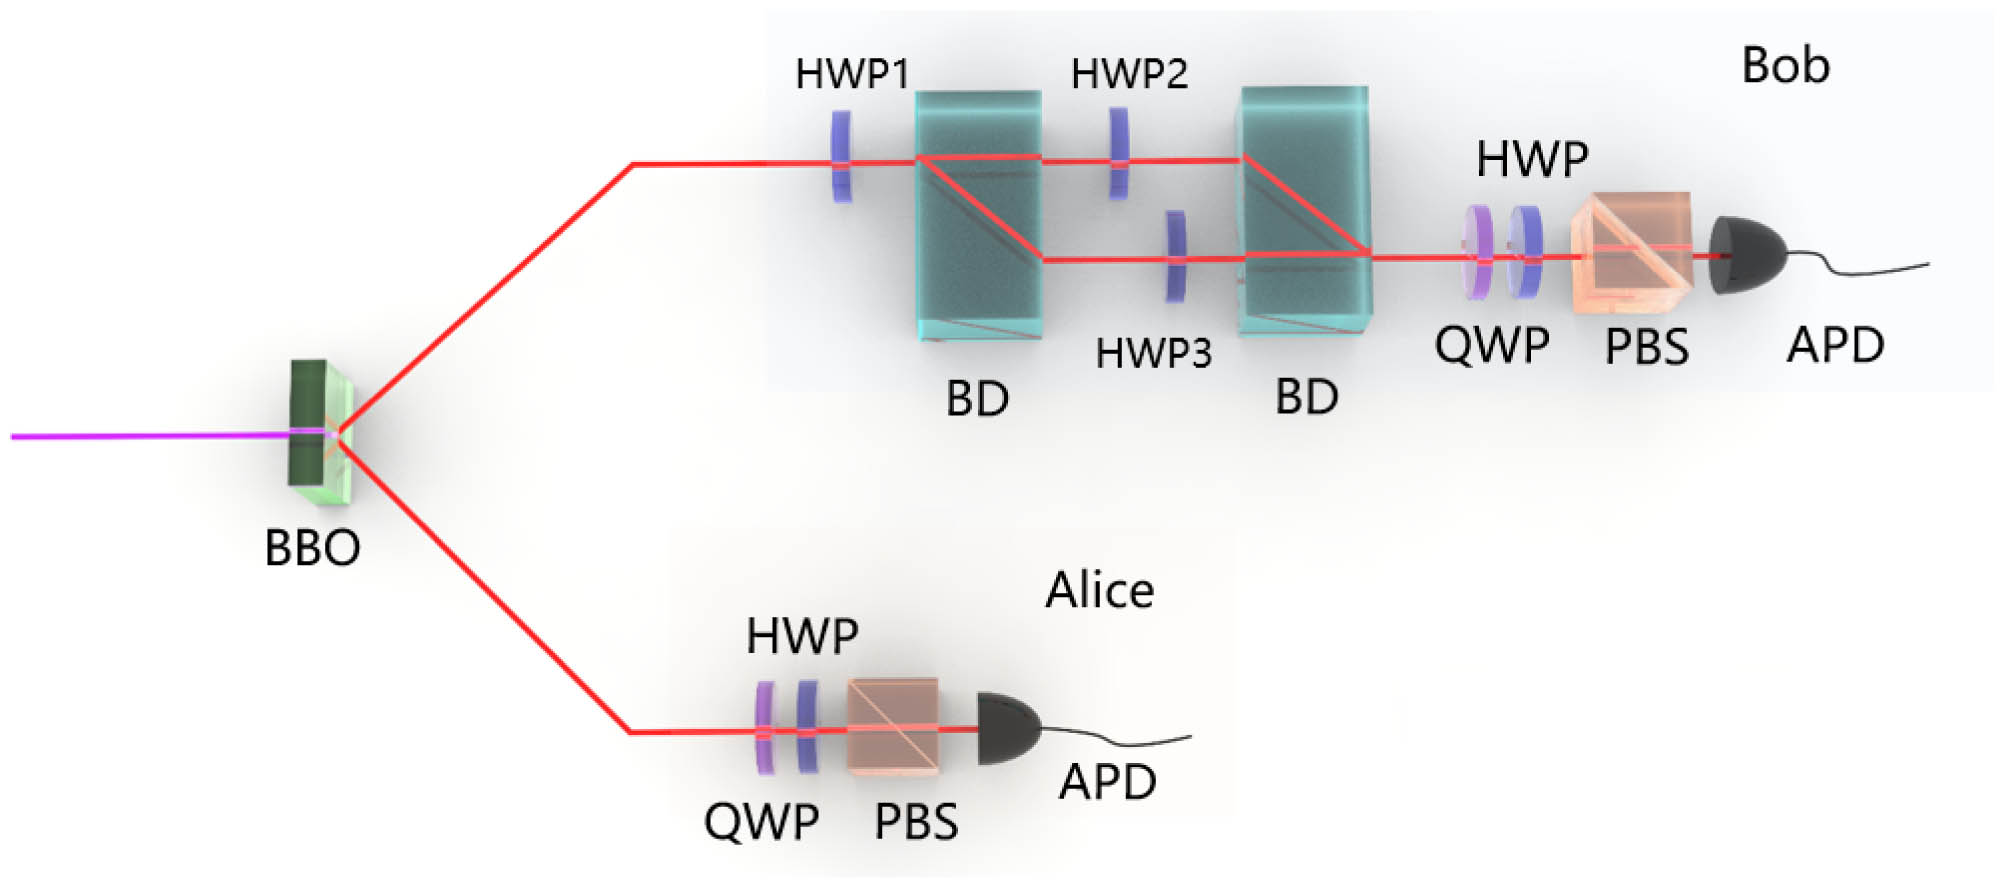 Experimental setup. Polarization-entangled photons pairs are generated via nonlinear crystal. An asymmetric loss interferometer along with half-wave plates (HWPs) is used to prepare two-qubit pure entangled states. The projective measurements are performed using wave plates and polarization beam splitter (PBS).